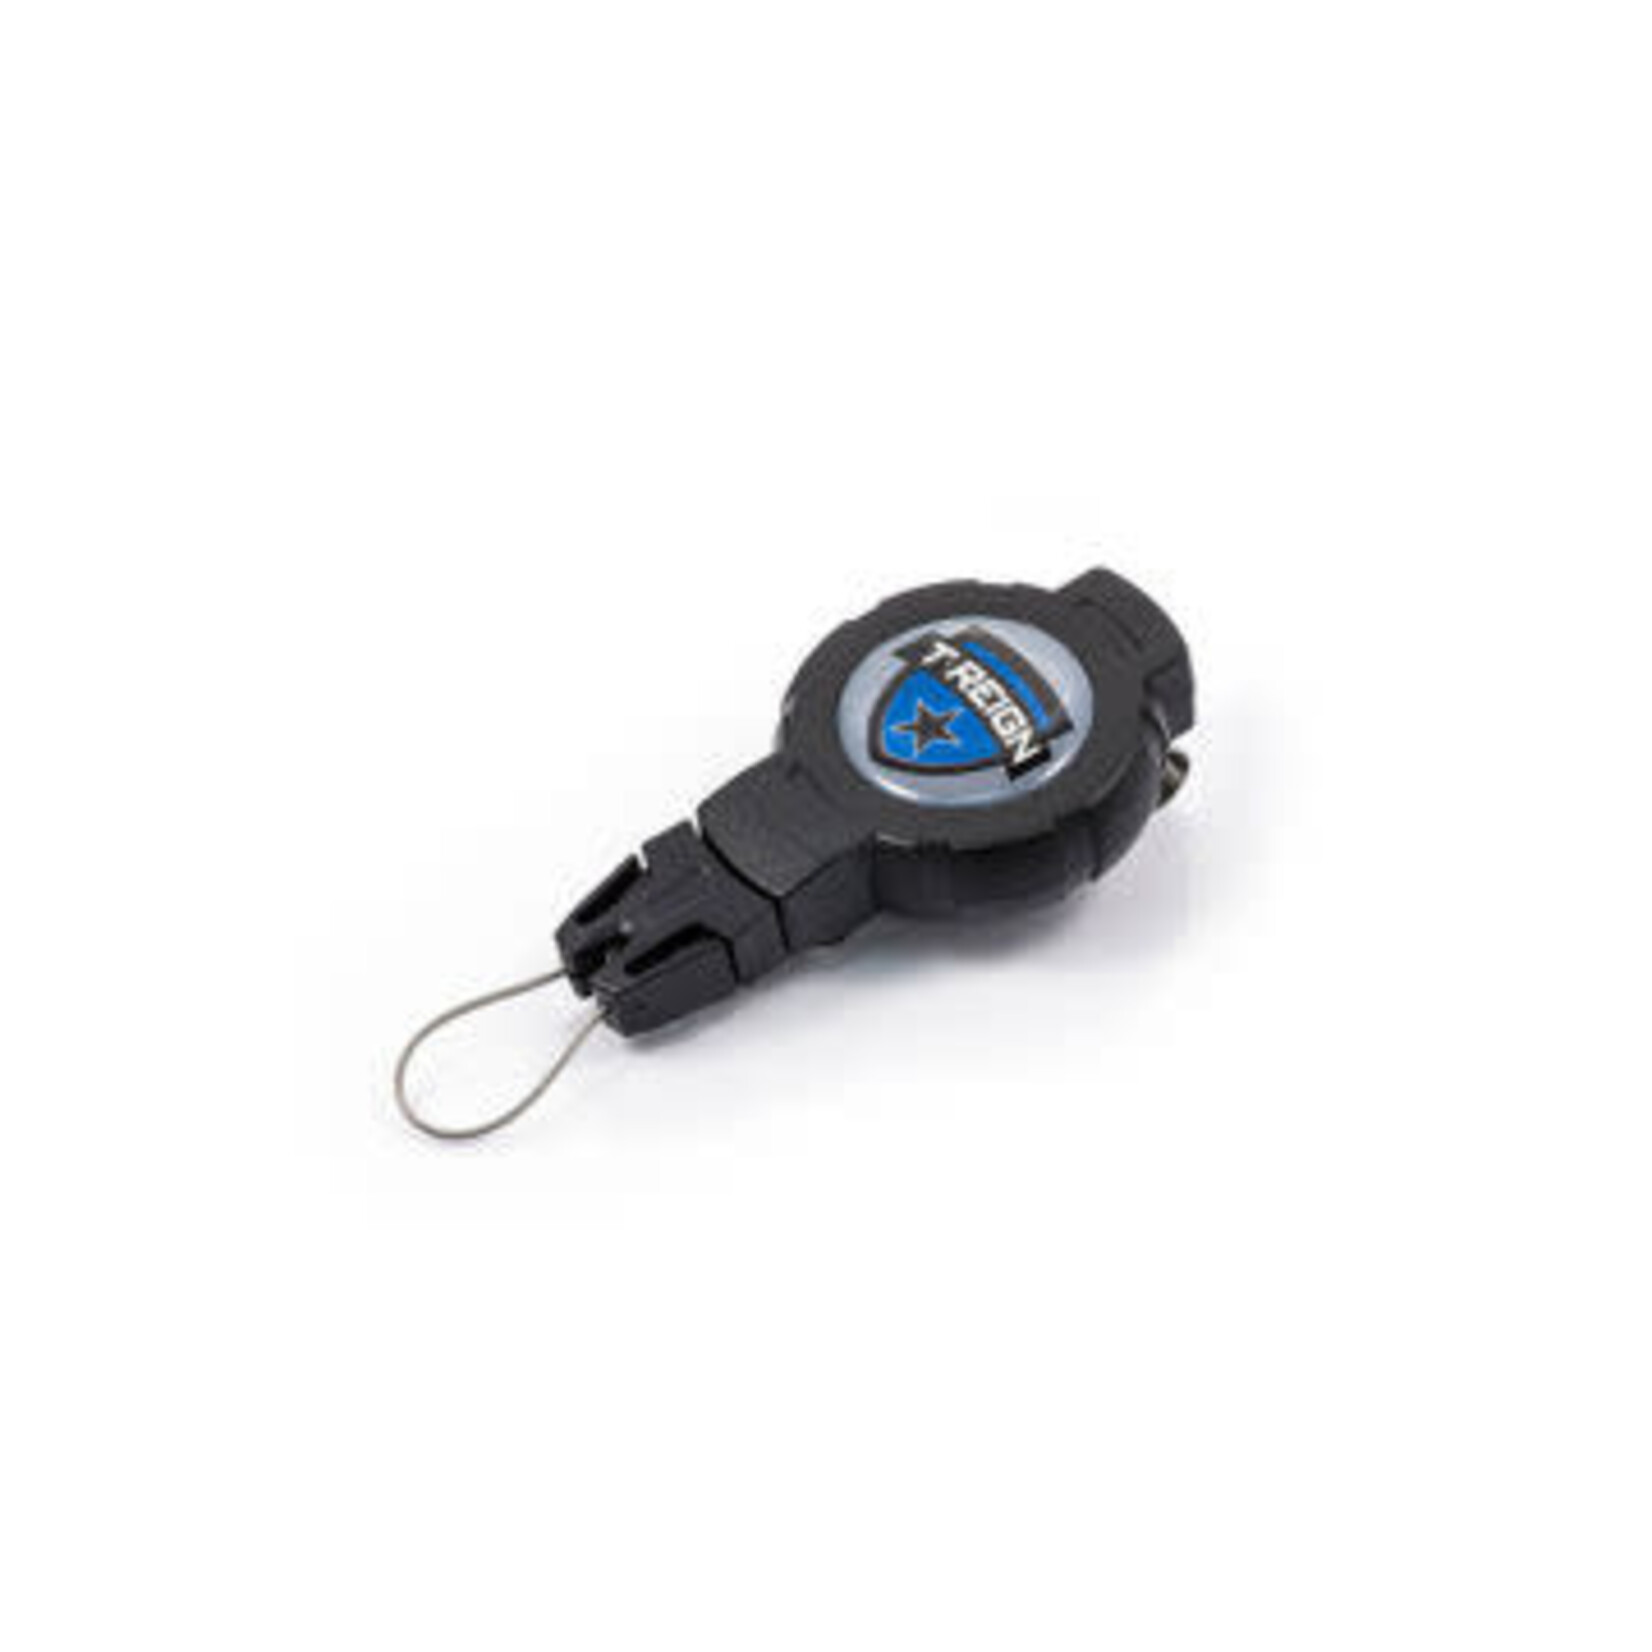 West Coast Corporation T-Reign Retractable Gear Tether , Large,Carabiner connection (Fish series)